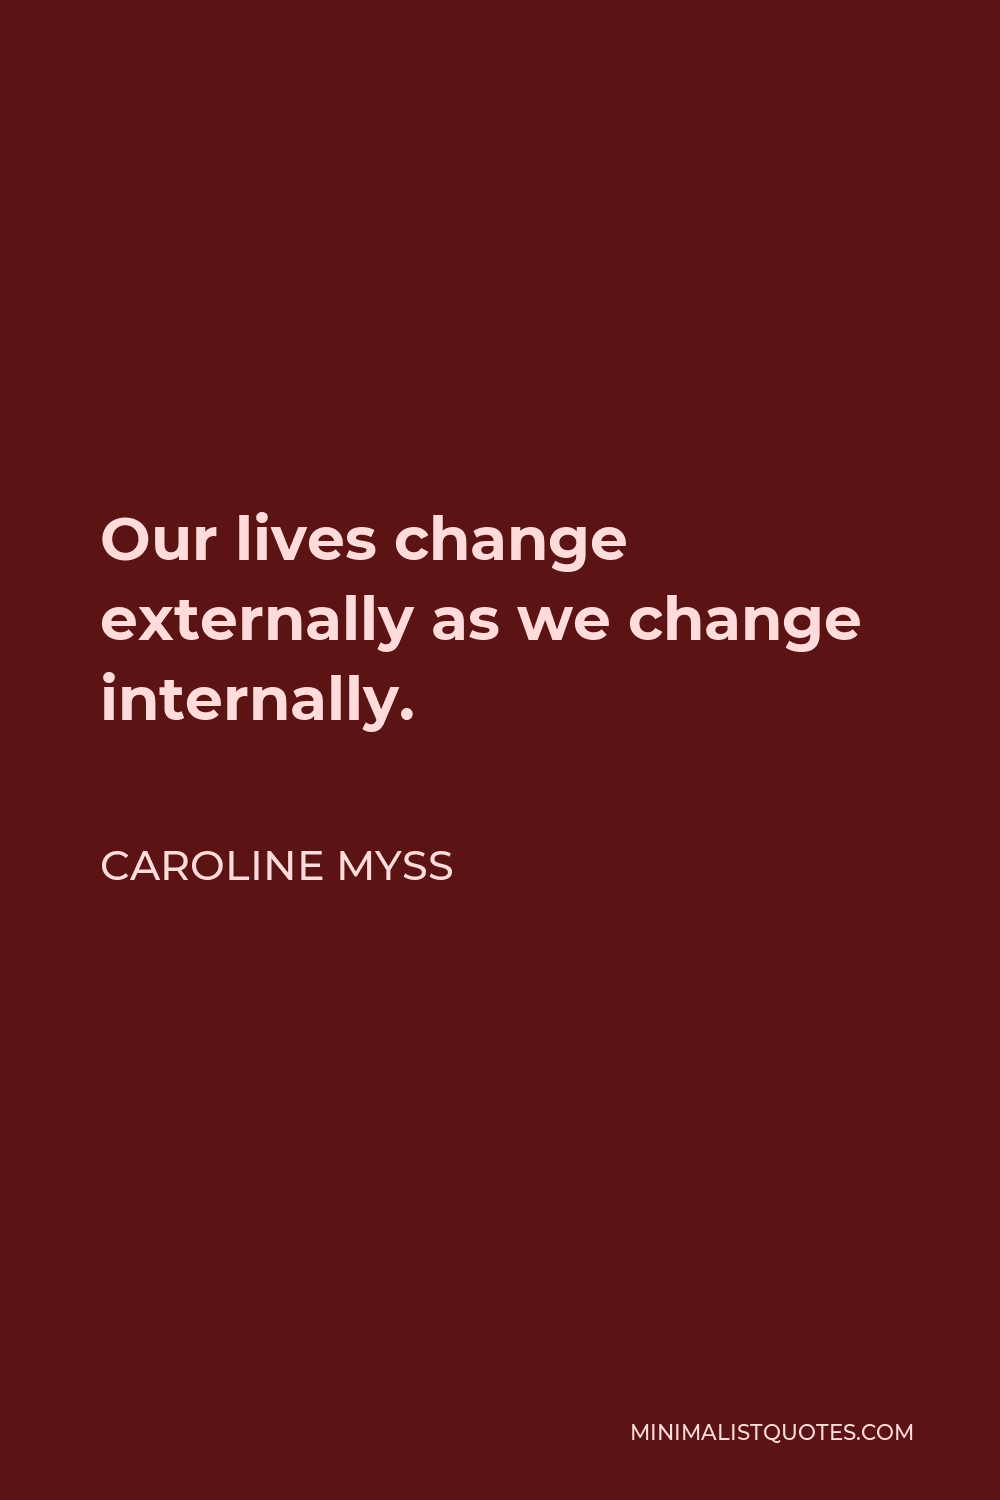 Caroline Myss Quote - Our lives change externally as we change internally.